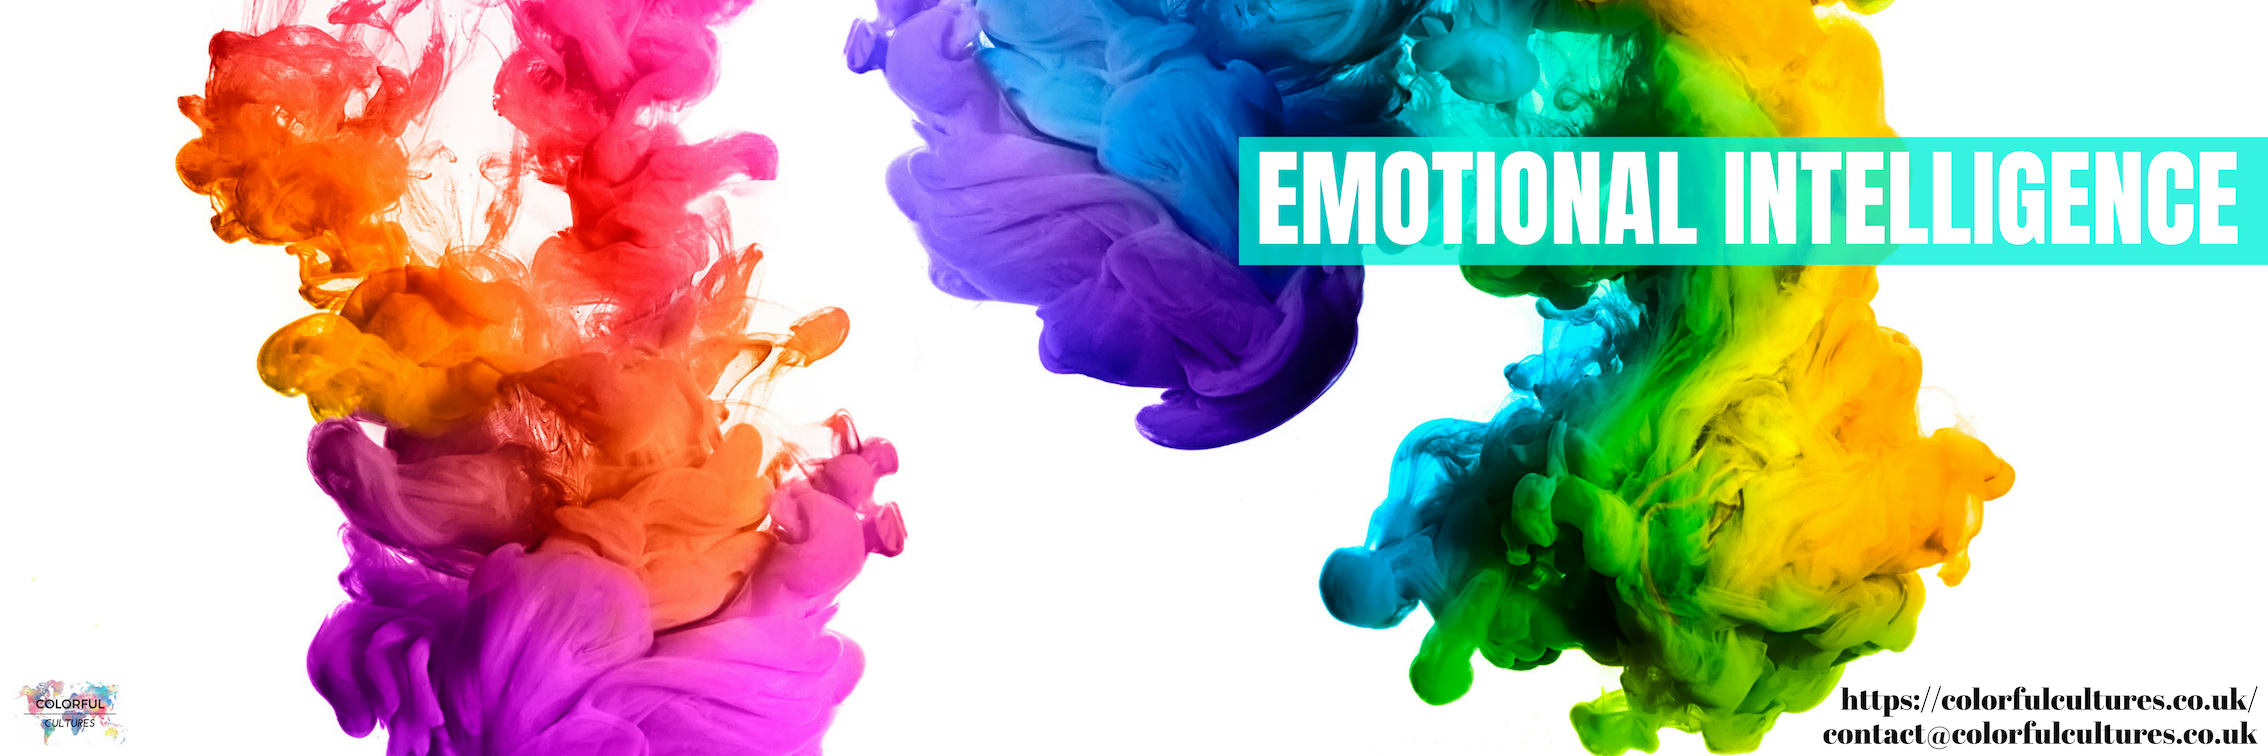 Emotional Intelligence Colorfull Cultures